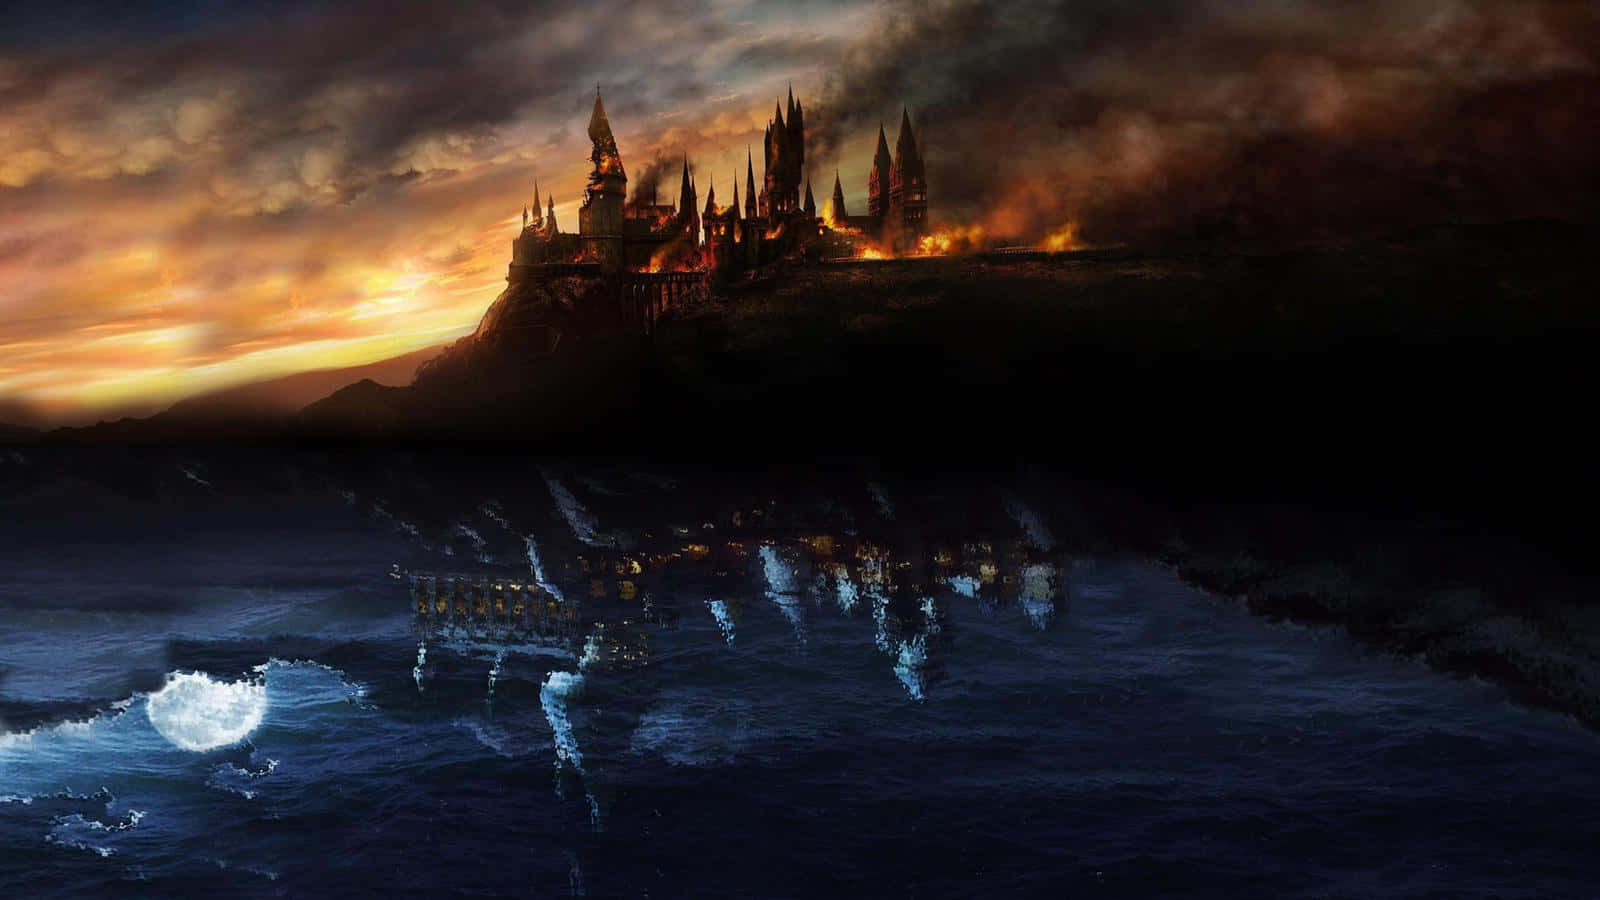 "The Battle of Hogwarts: Every Hogwarts Student faces the ultimate challenge" Wallpaper